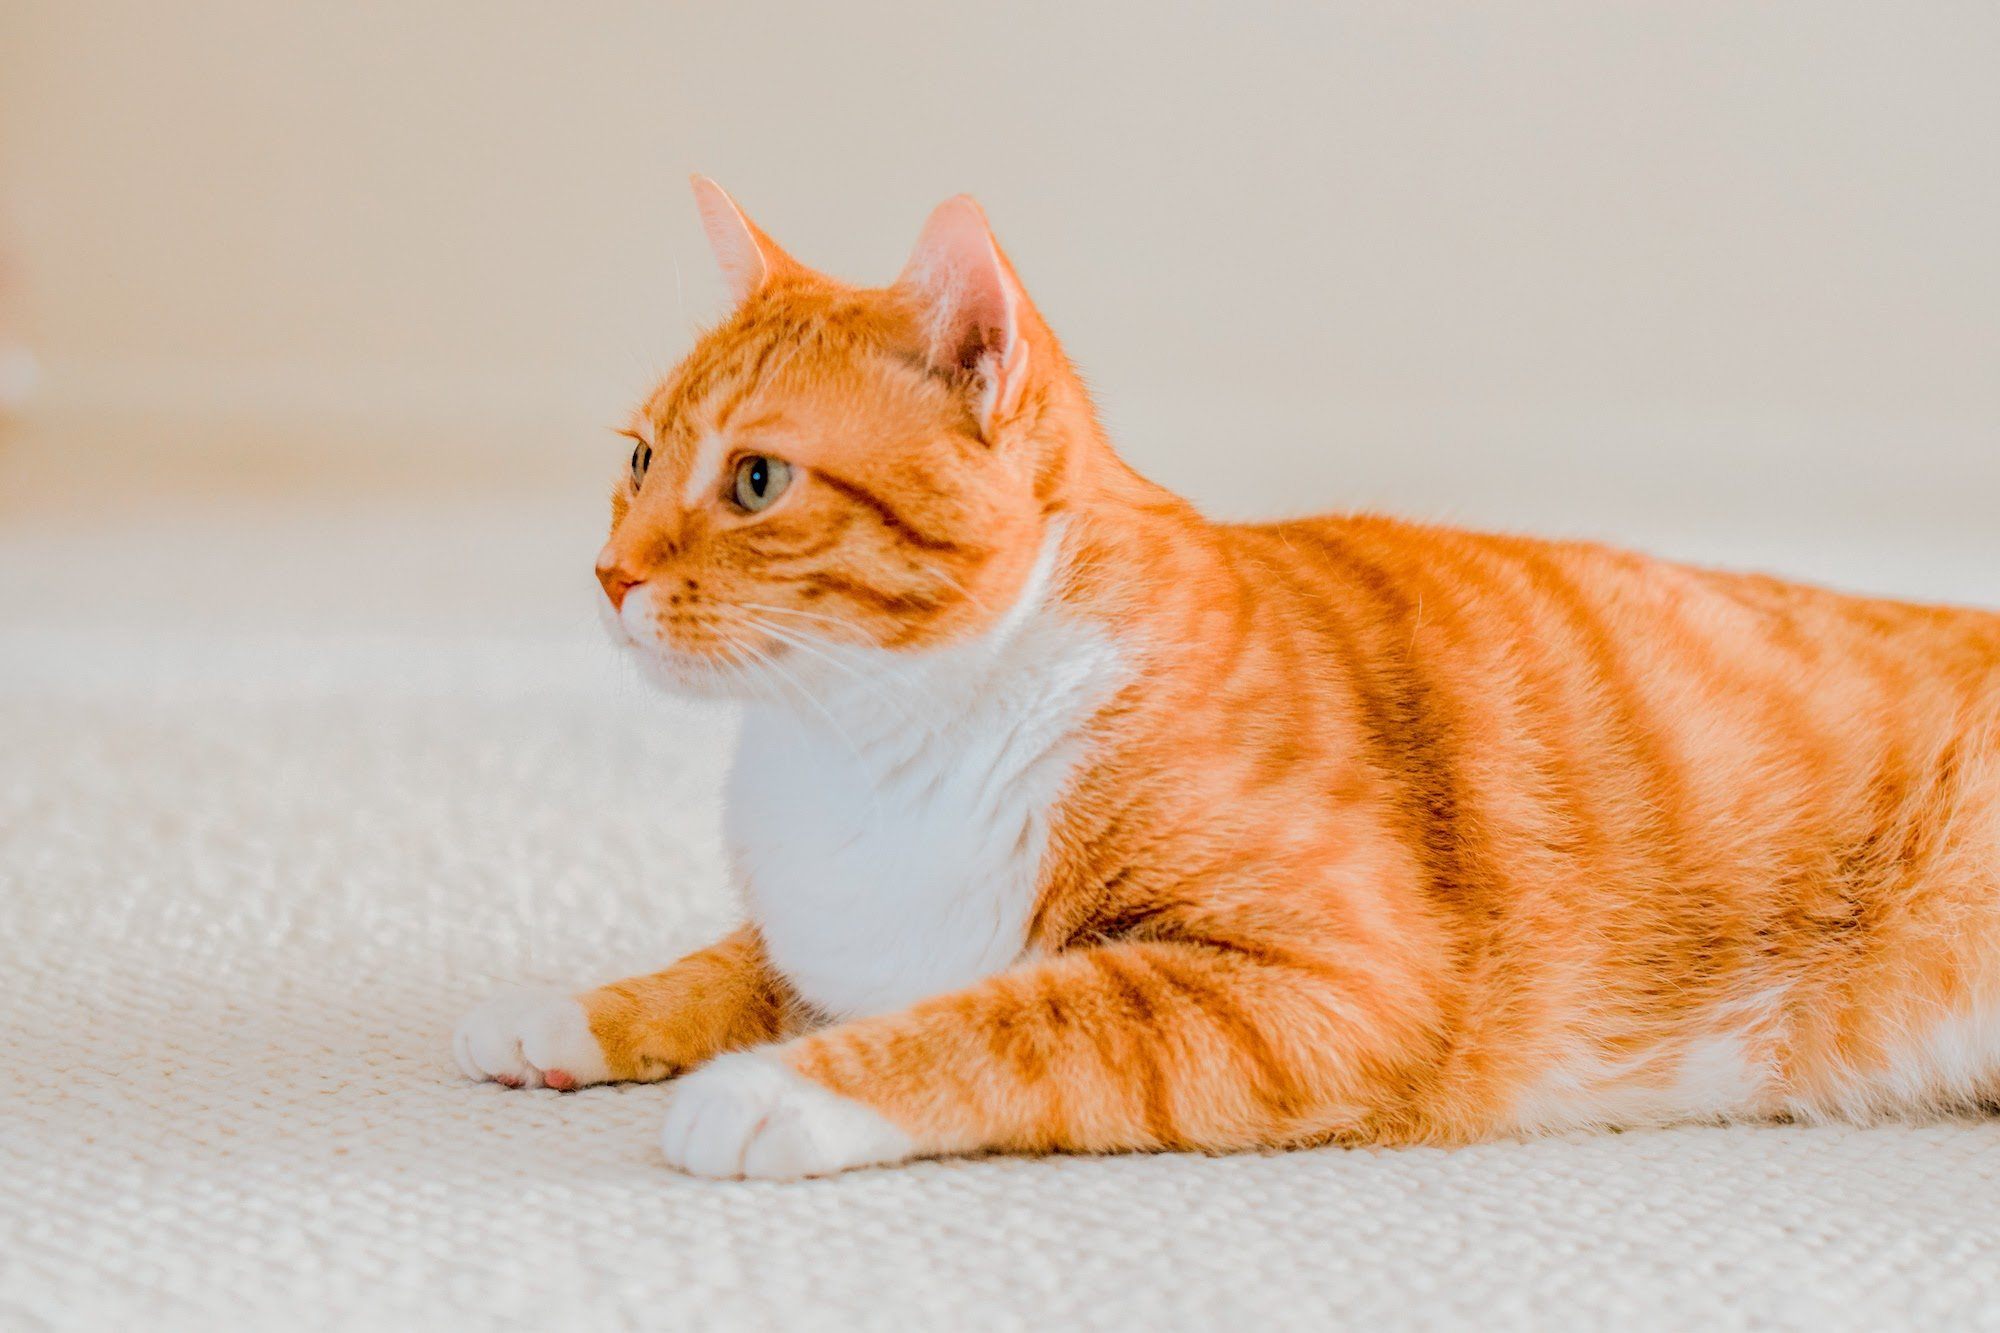 Pretty Litter vs. Fresh Step Cat Litter: What's the Difference?